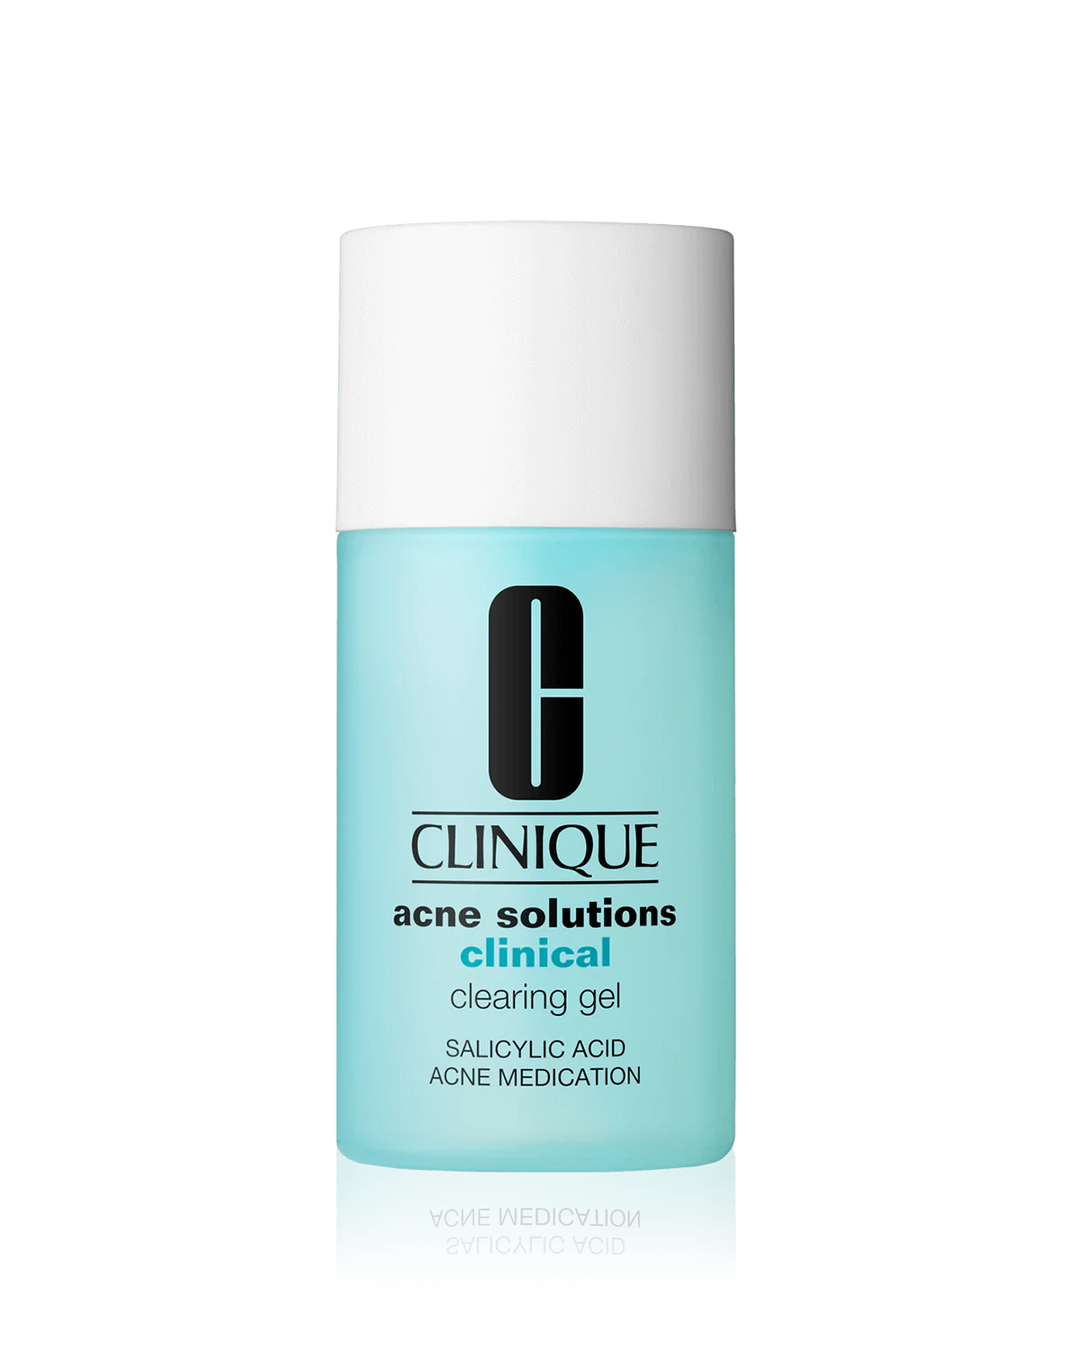 Shop The Latest Collection Of Clinique Acne Solutions Clinical Clearing Gel In Lebanon